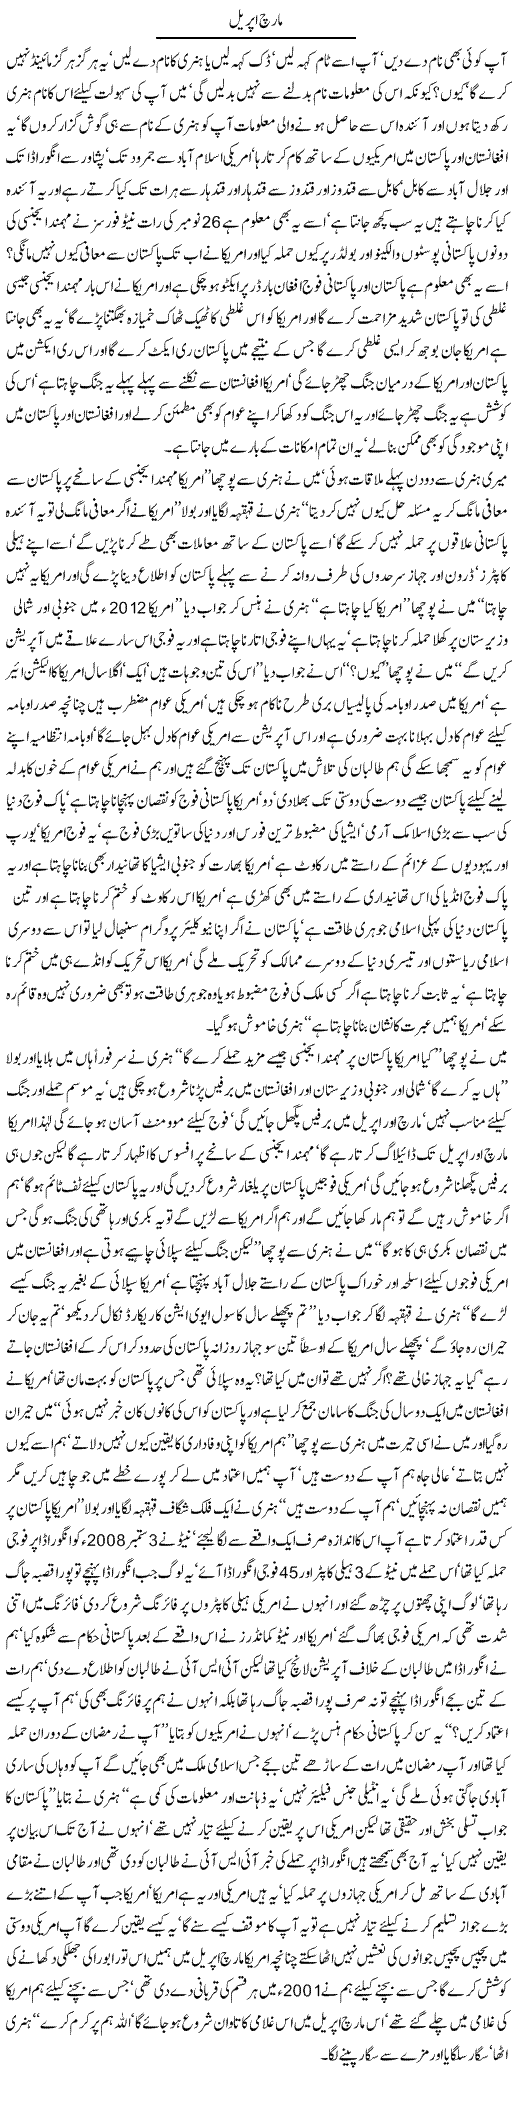 March April Express Column Javed Chaudhry 14 December 2011